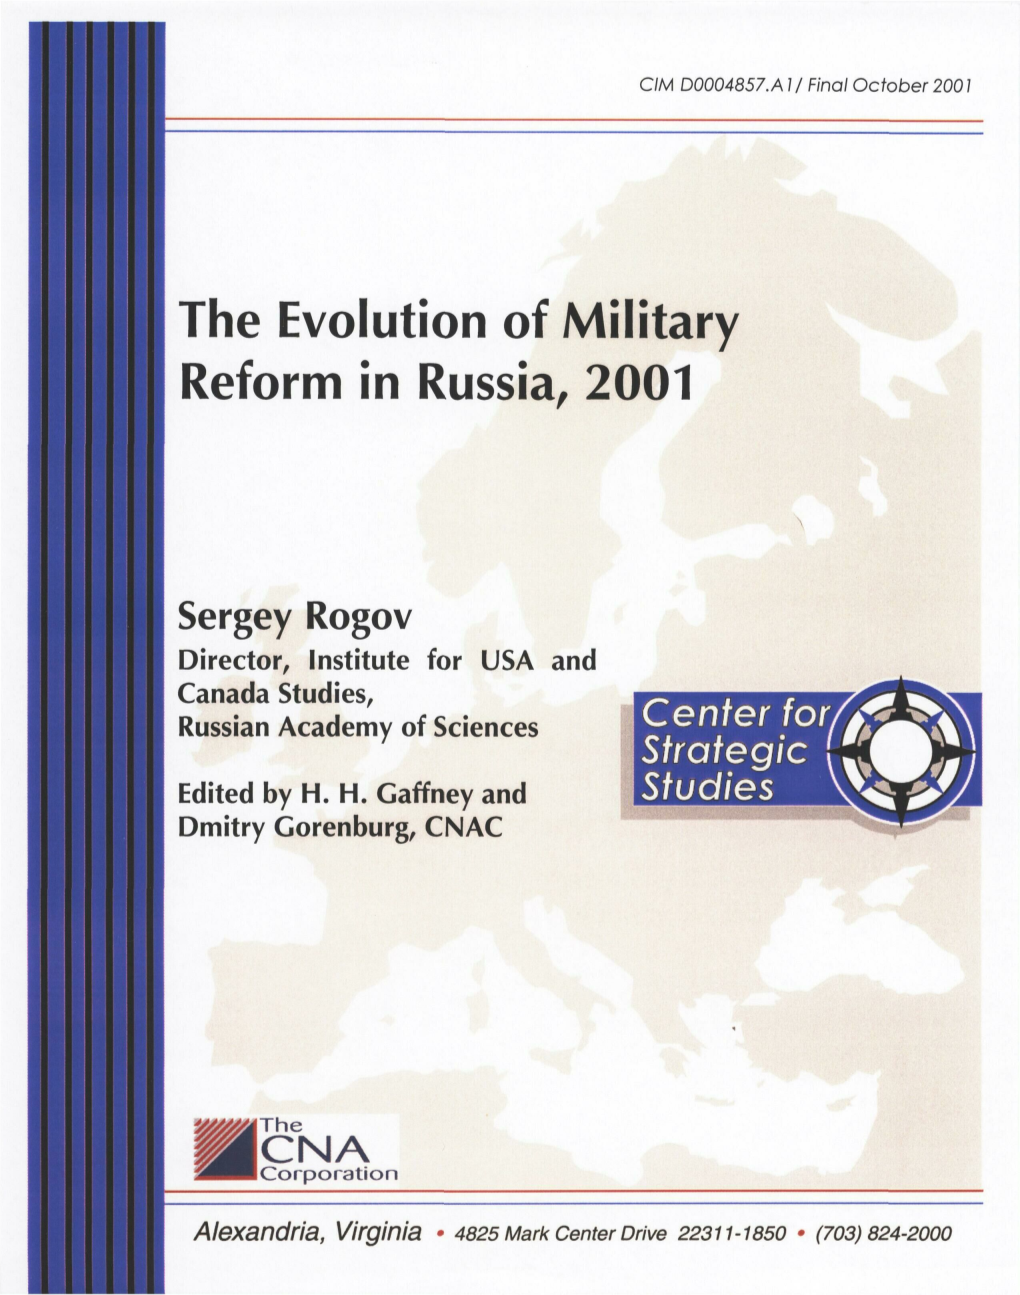 The Evolution of Military Reform in Russia, 2001